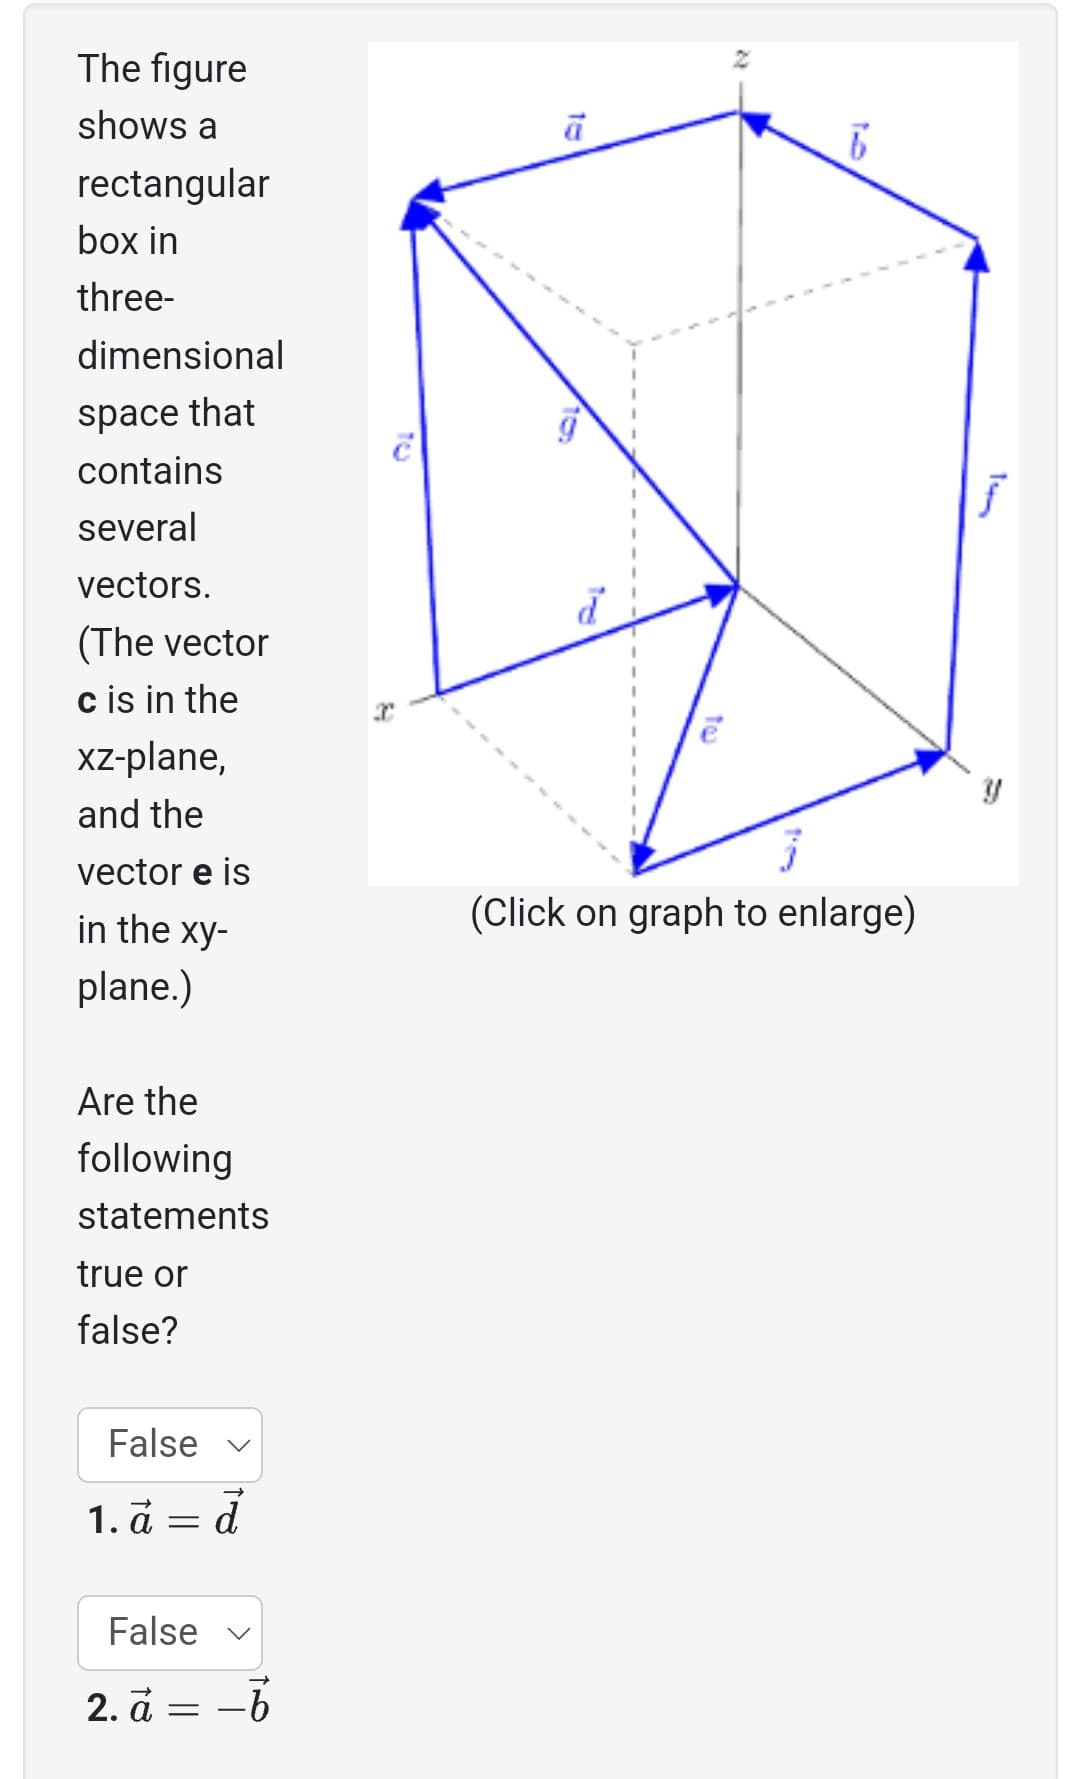 The figure
shows a
rectangular
box in
three-
dimensional
space that
contains
several
vectors.
(The vector
c is in the
xz-plane,
and the
vector e is
in the xy-
plane.)
Are the
following
statements
true or
false?
False ✓
1. à = d
False
2. a = -b
ā
toj
22
(Click on graph to enlarge)
f